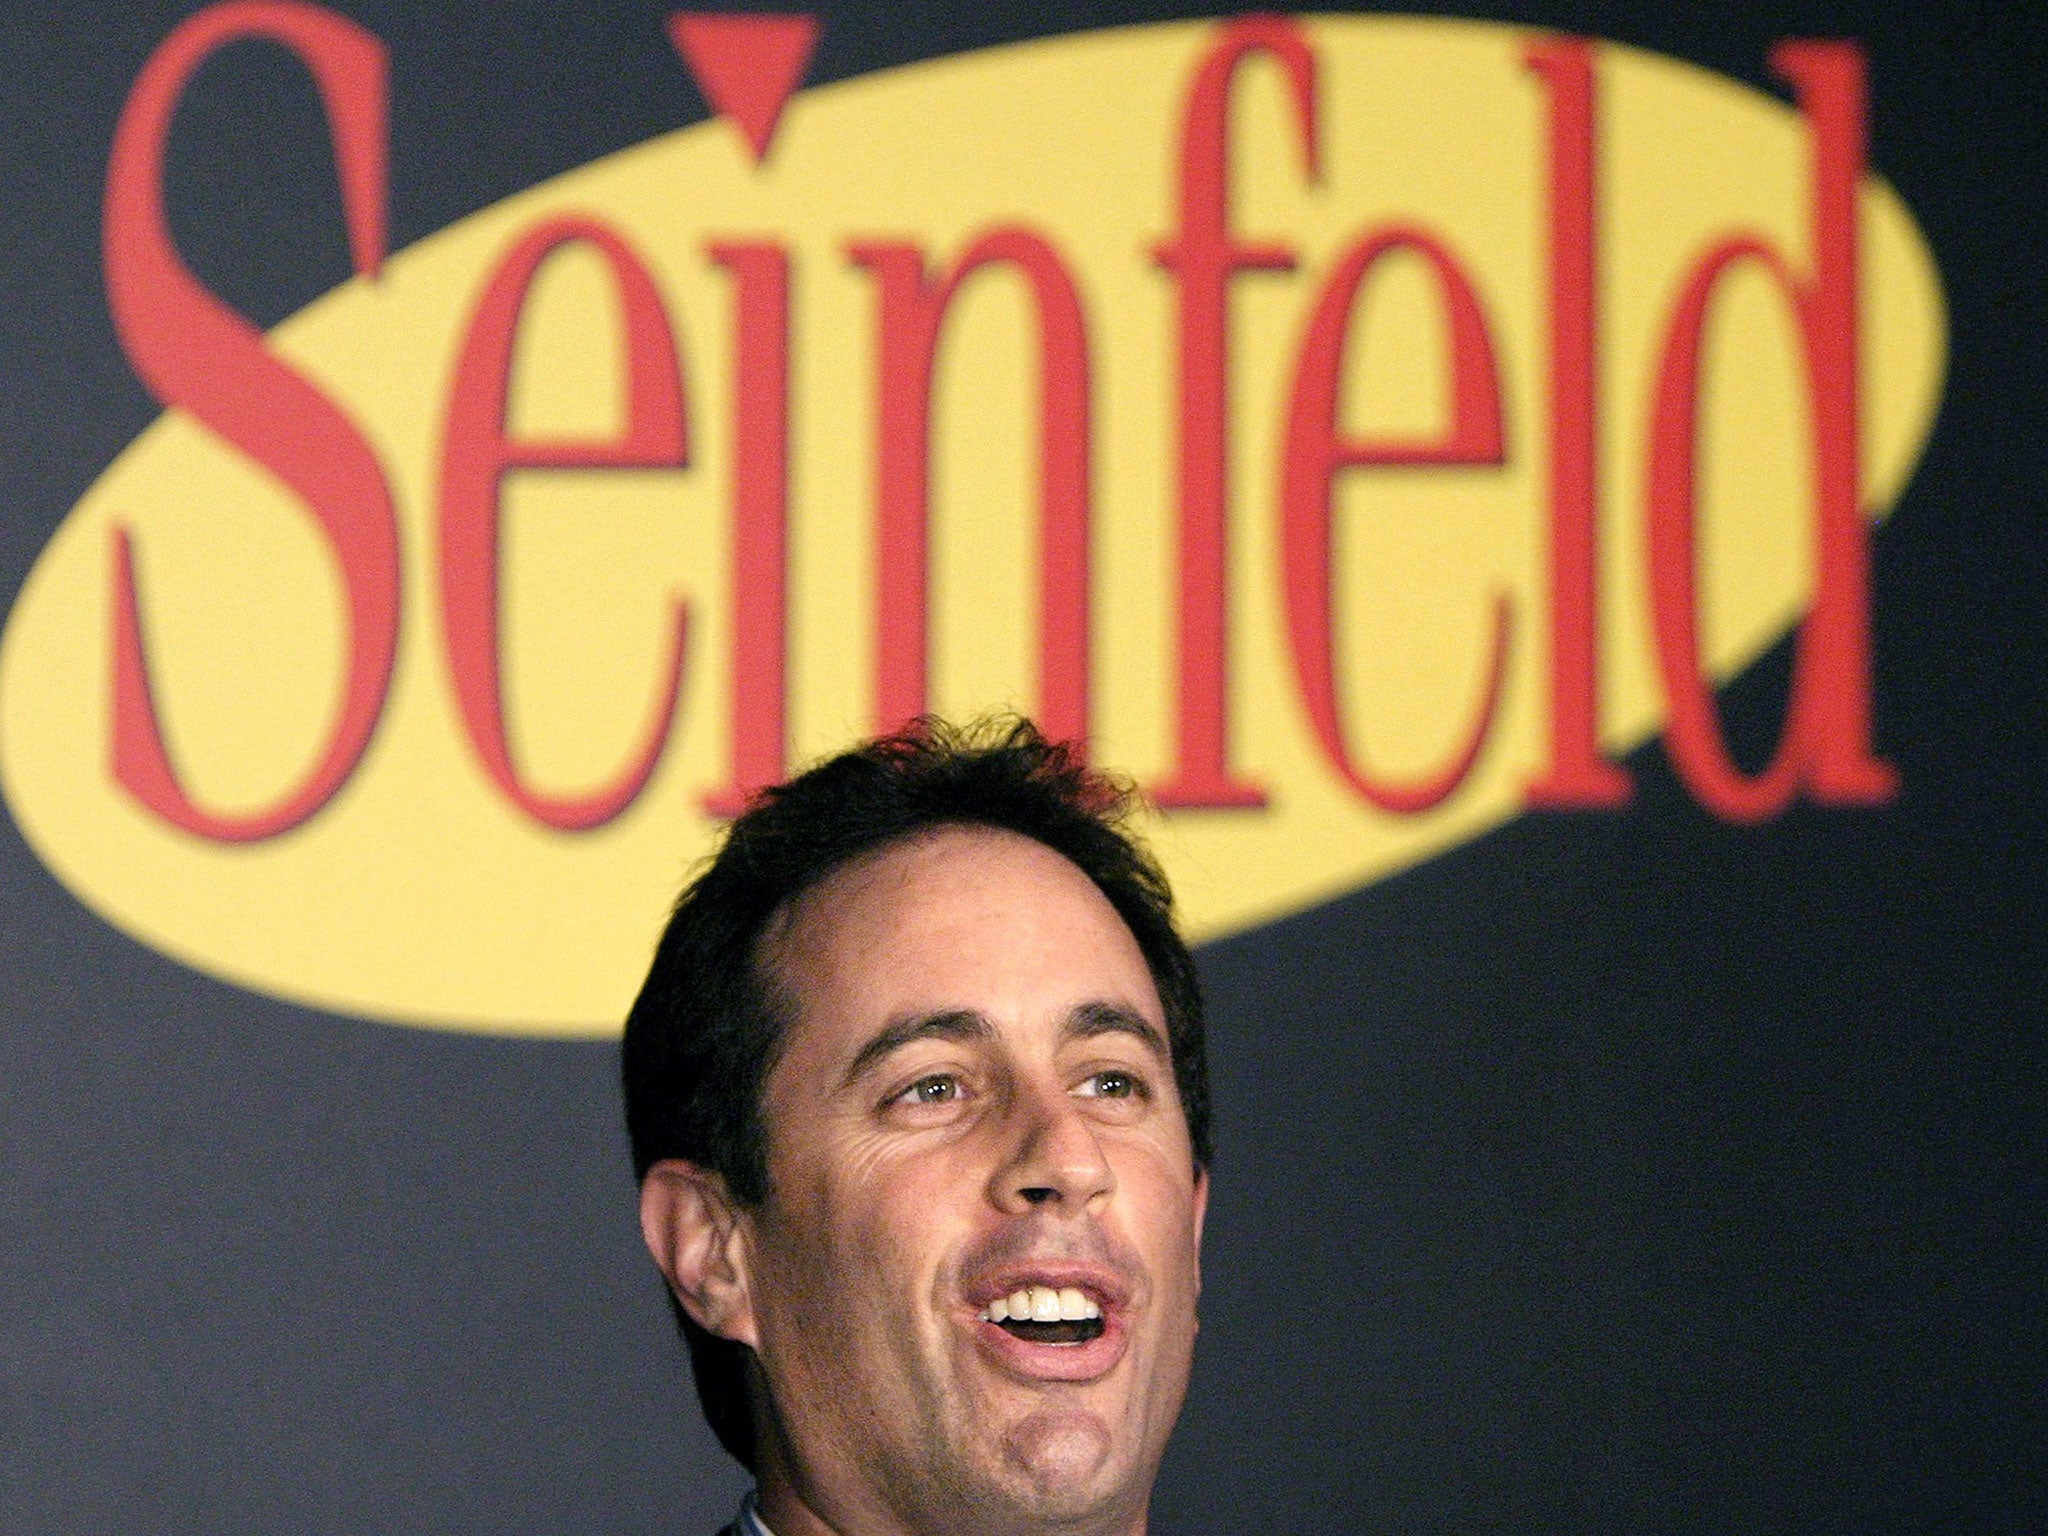 Ending Seinfeld at its peak has proved the most lucrative decision comic Jerry Seinfeld ever made